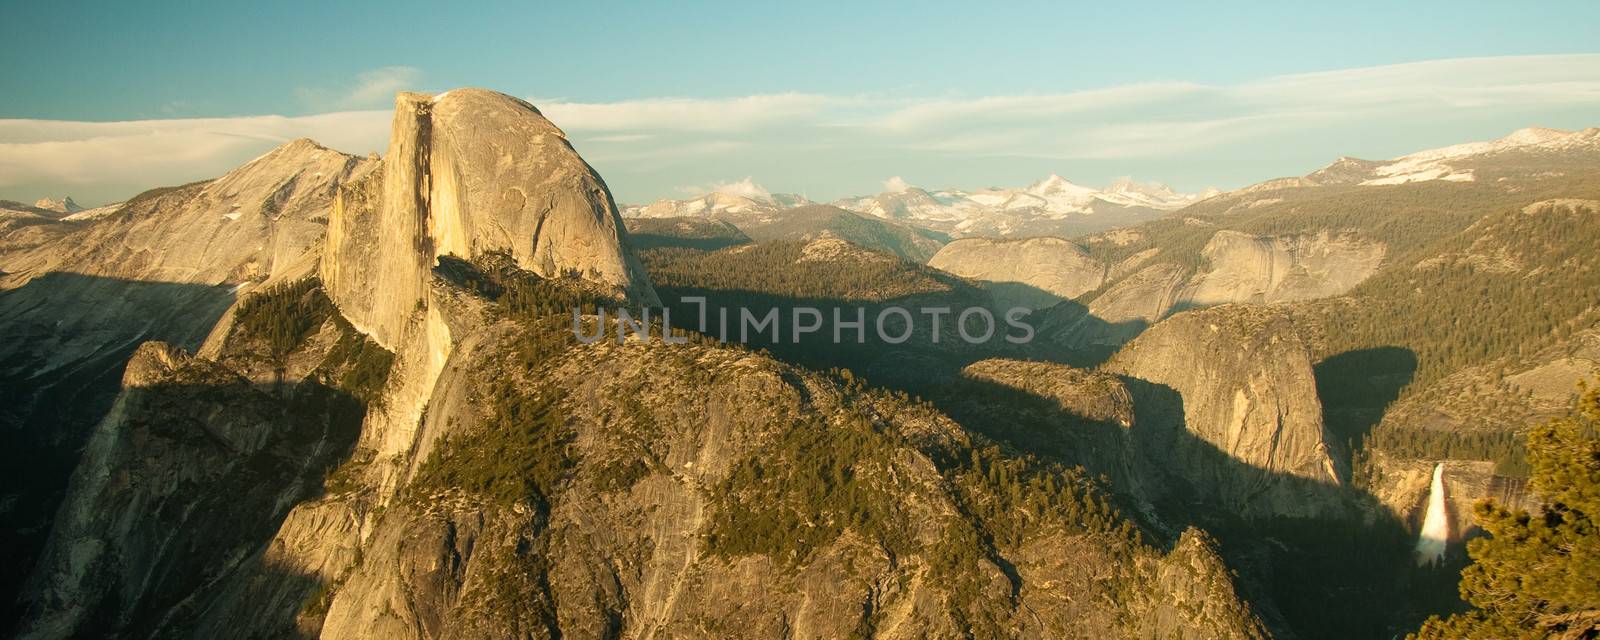 Panoramic view of mountains in Yosemite National Park viewed from Glacier Point, California, U.S.A.